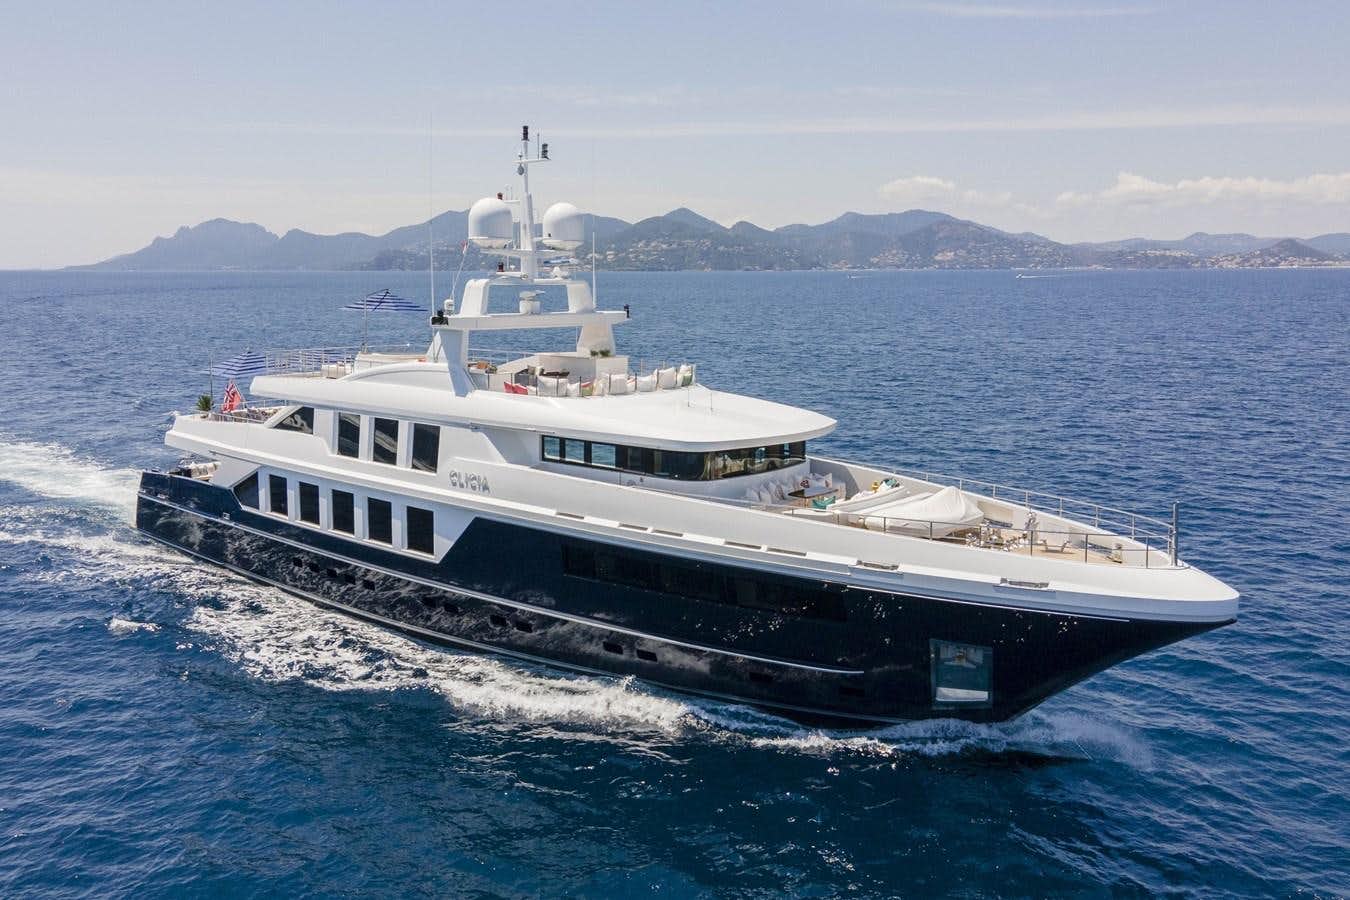 Yacht for Charter with Fishing Equipment